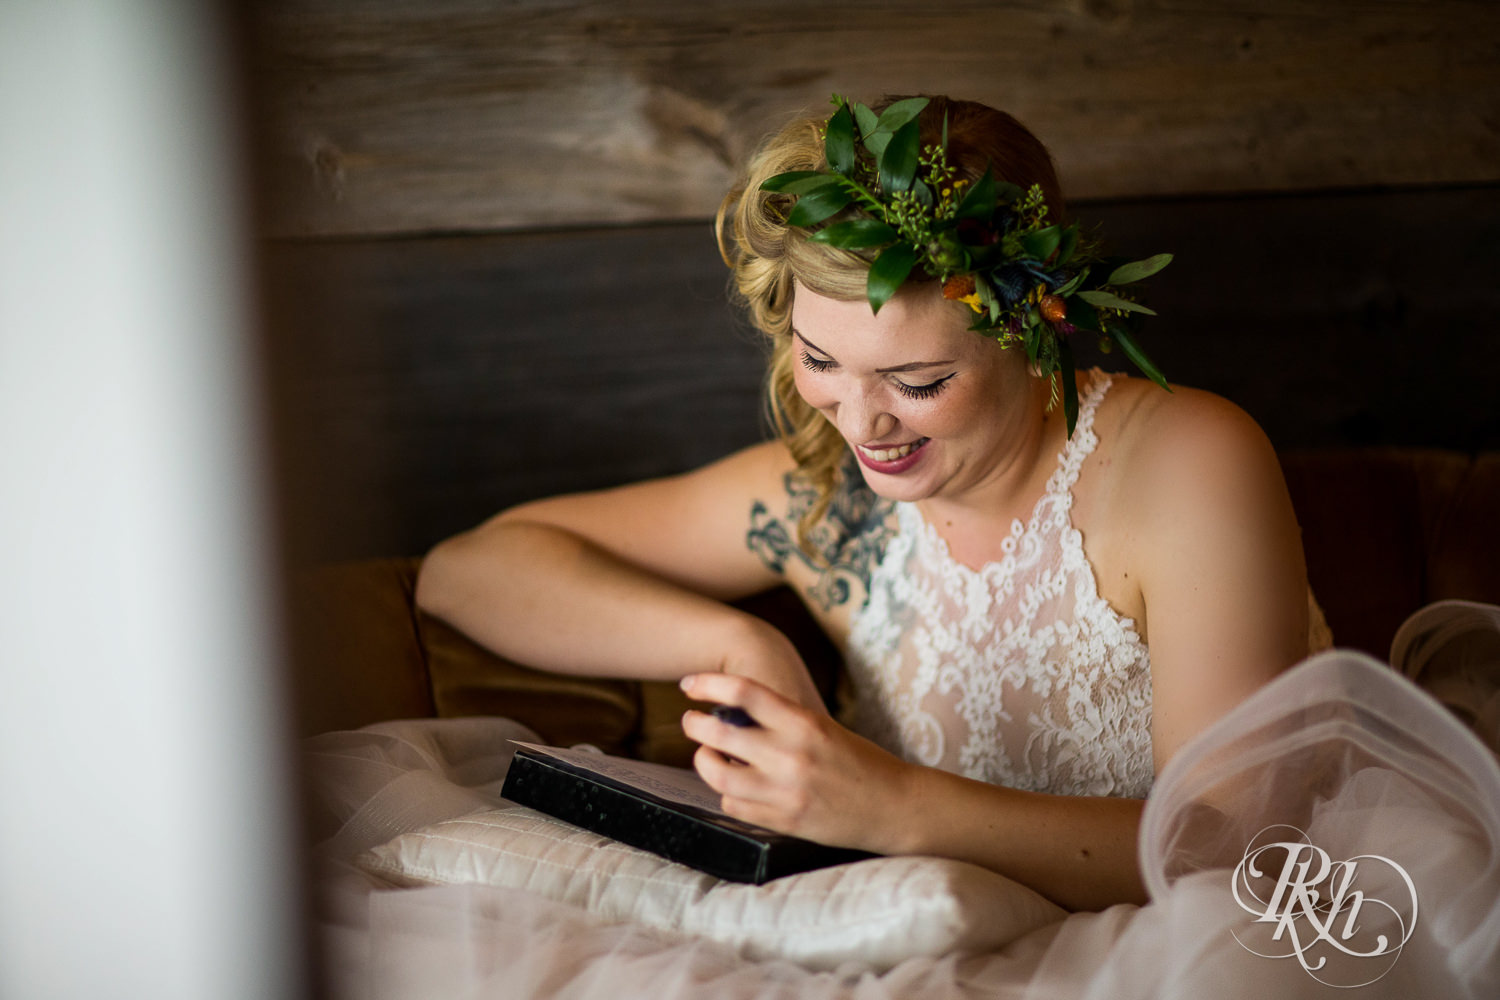 Bride writes vows before wedding at Coops Event Barn in Dodge Center, Minnesota.